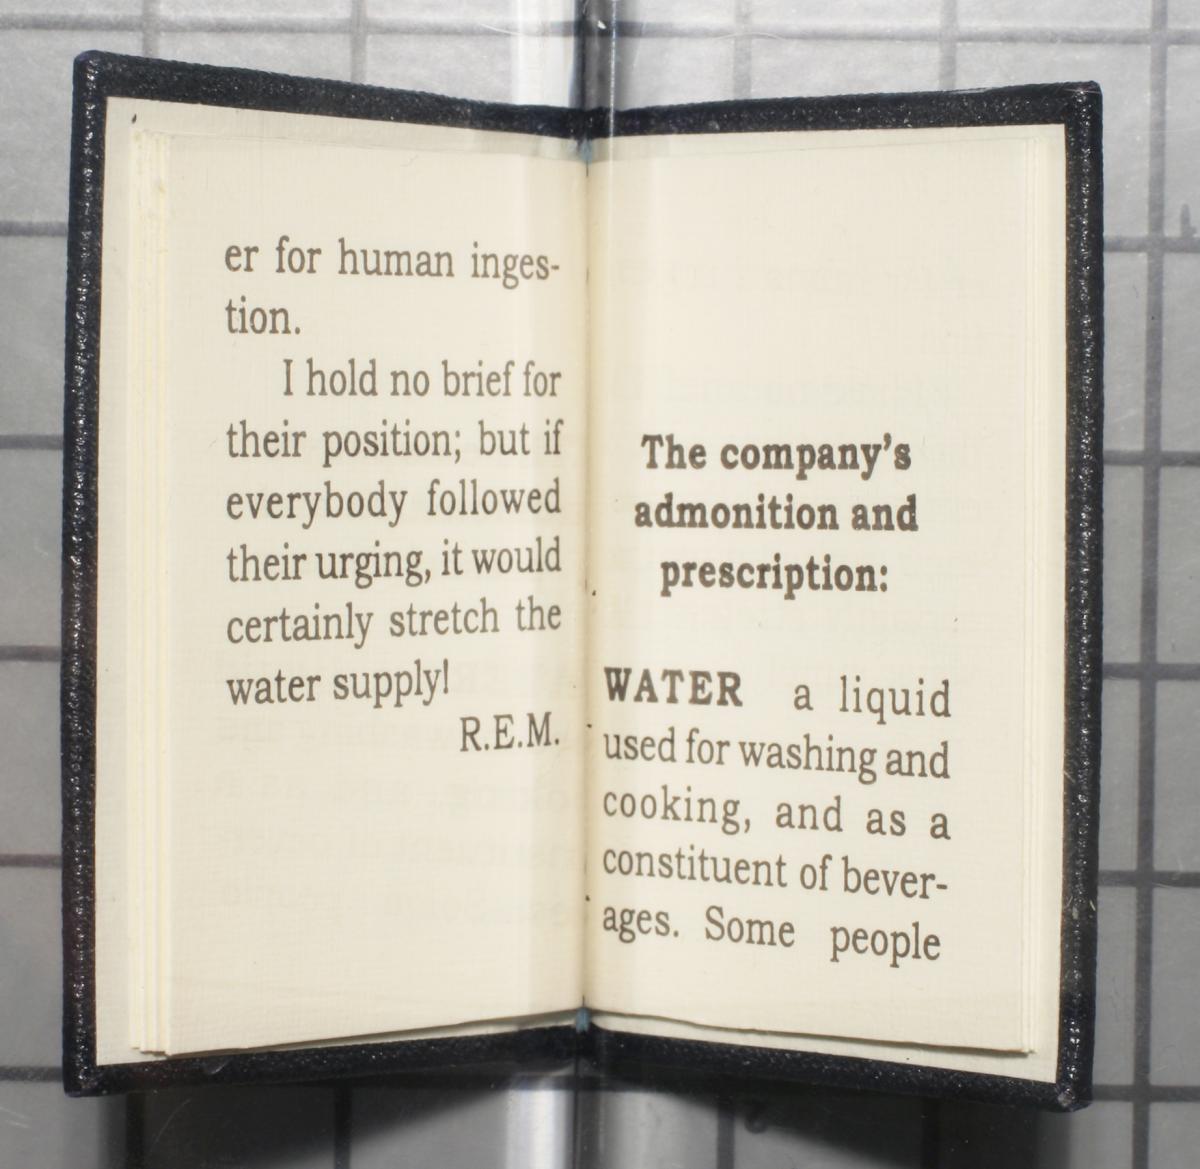 Water: from Proceedings of the Company of Amateur Brewers, 1932
                                                
                                                    [Sequence #]: 5 of 8
                                                